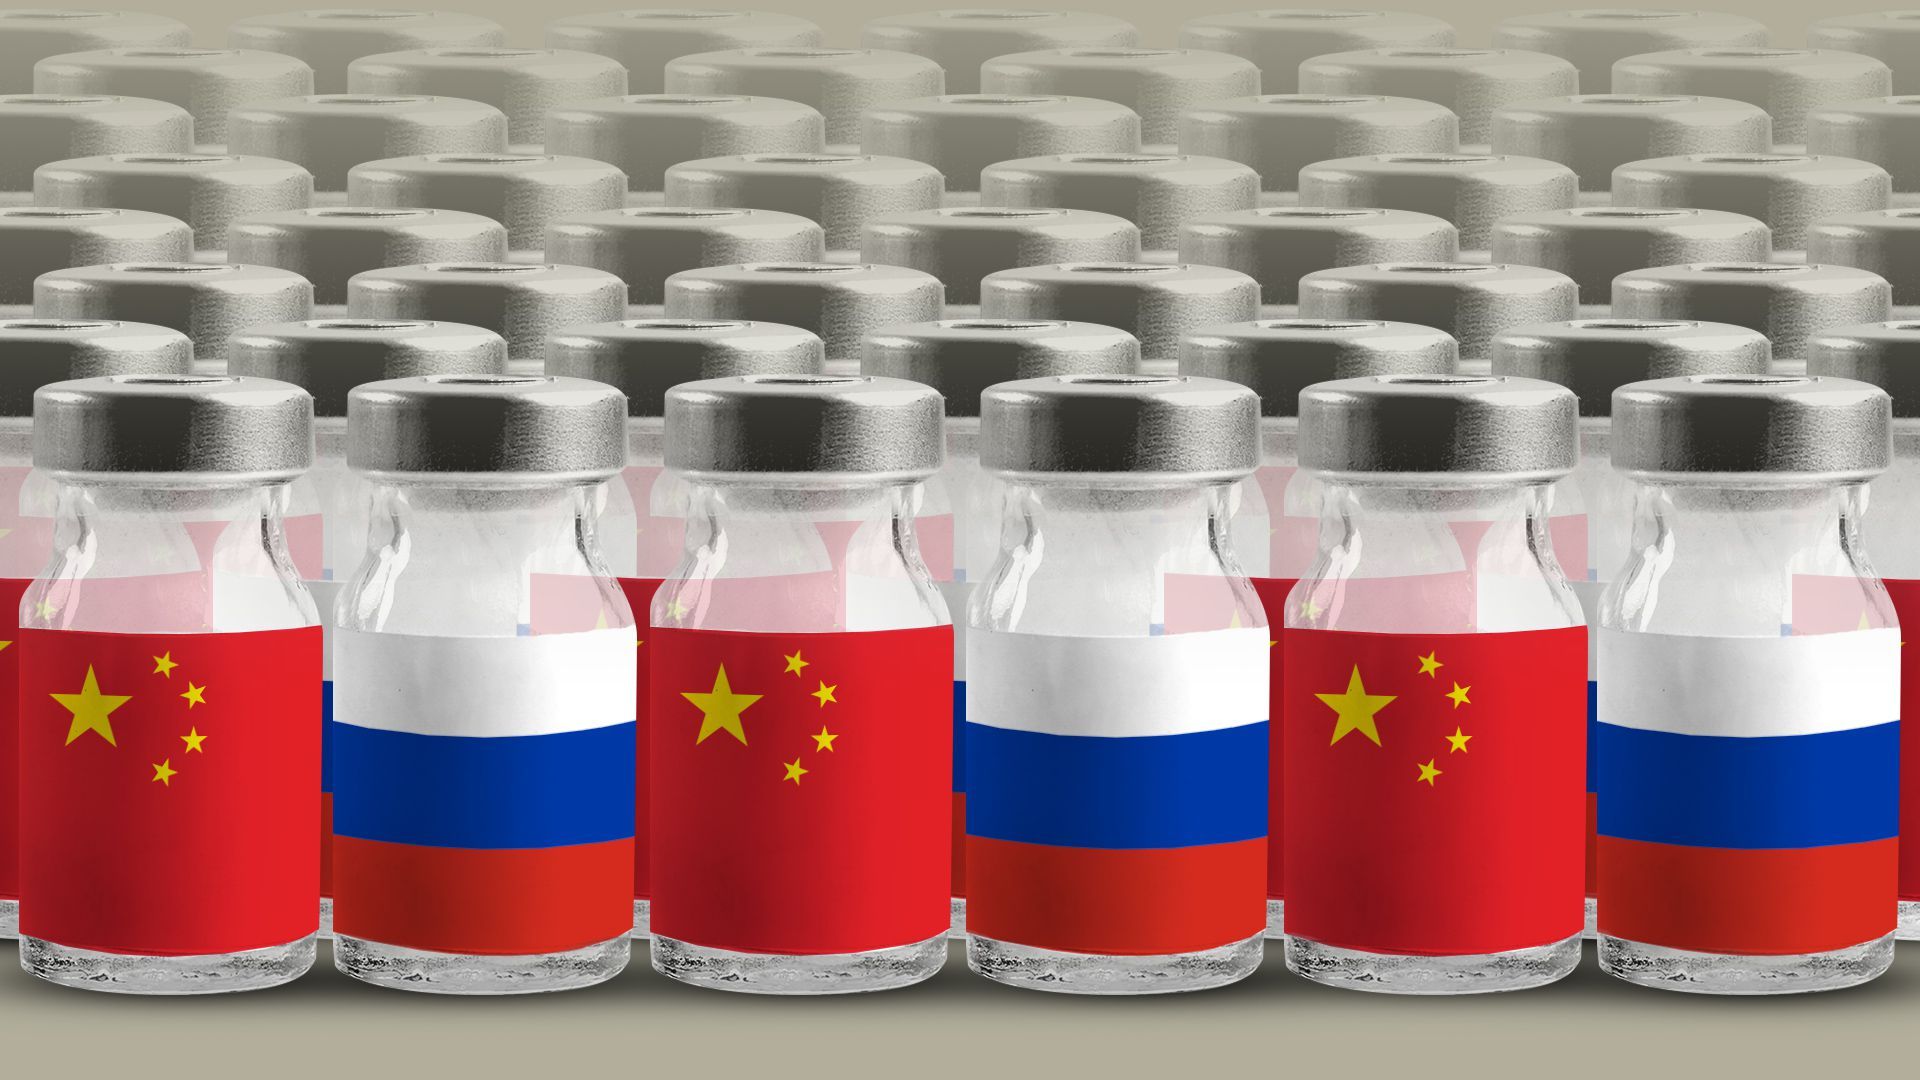 Illustration of rows and rows of vaccine vials with Russian and Chinese flags as labels. 